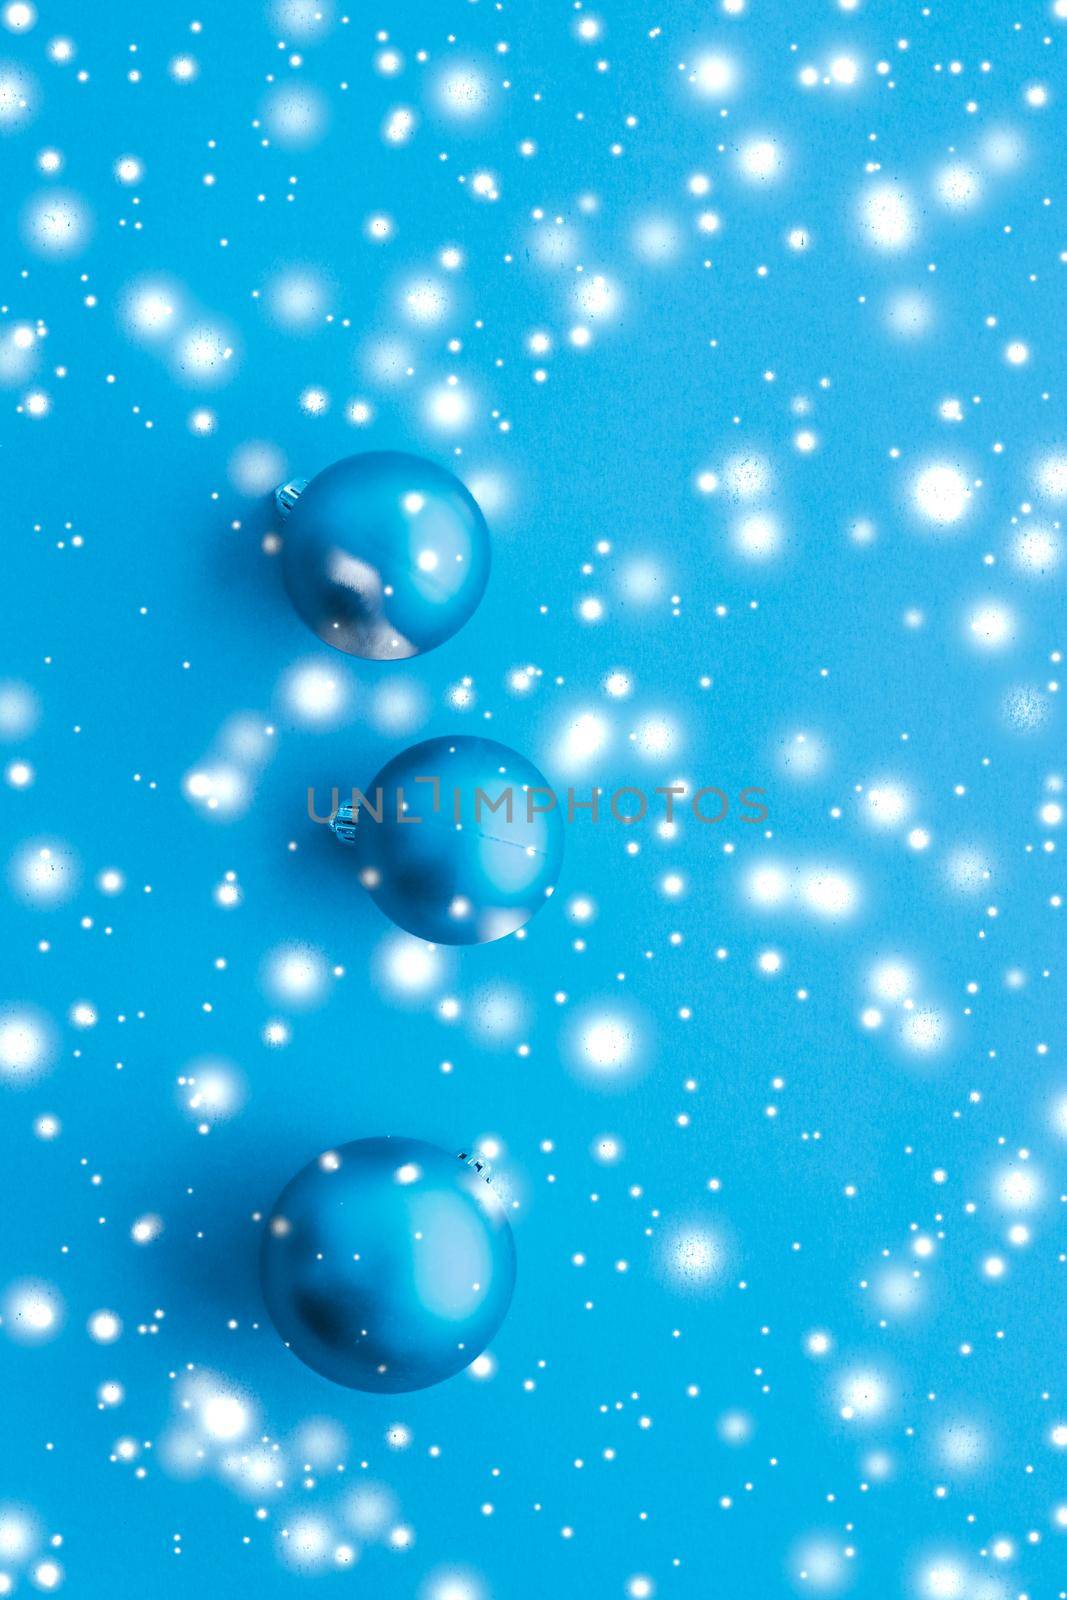 Gift decor, New Years Eve and happy celebration concept - Christmas baubles on blue background with snow glitter, luxury winter holiday card